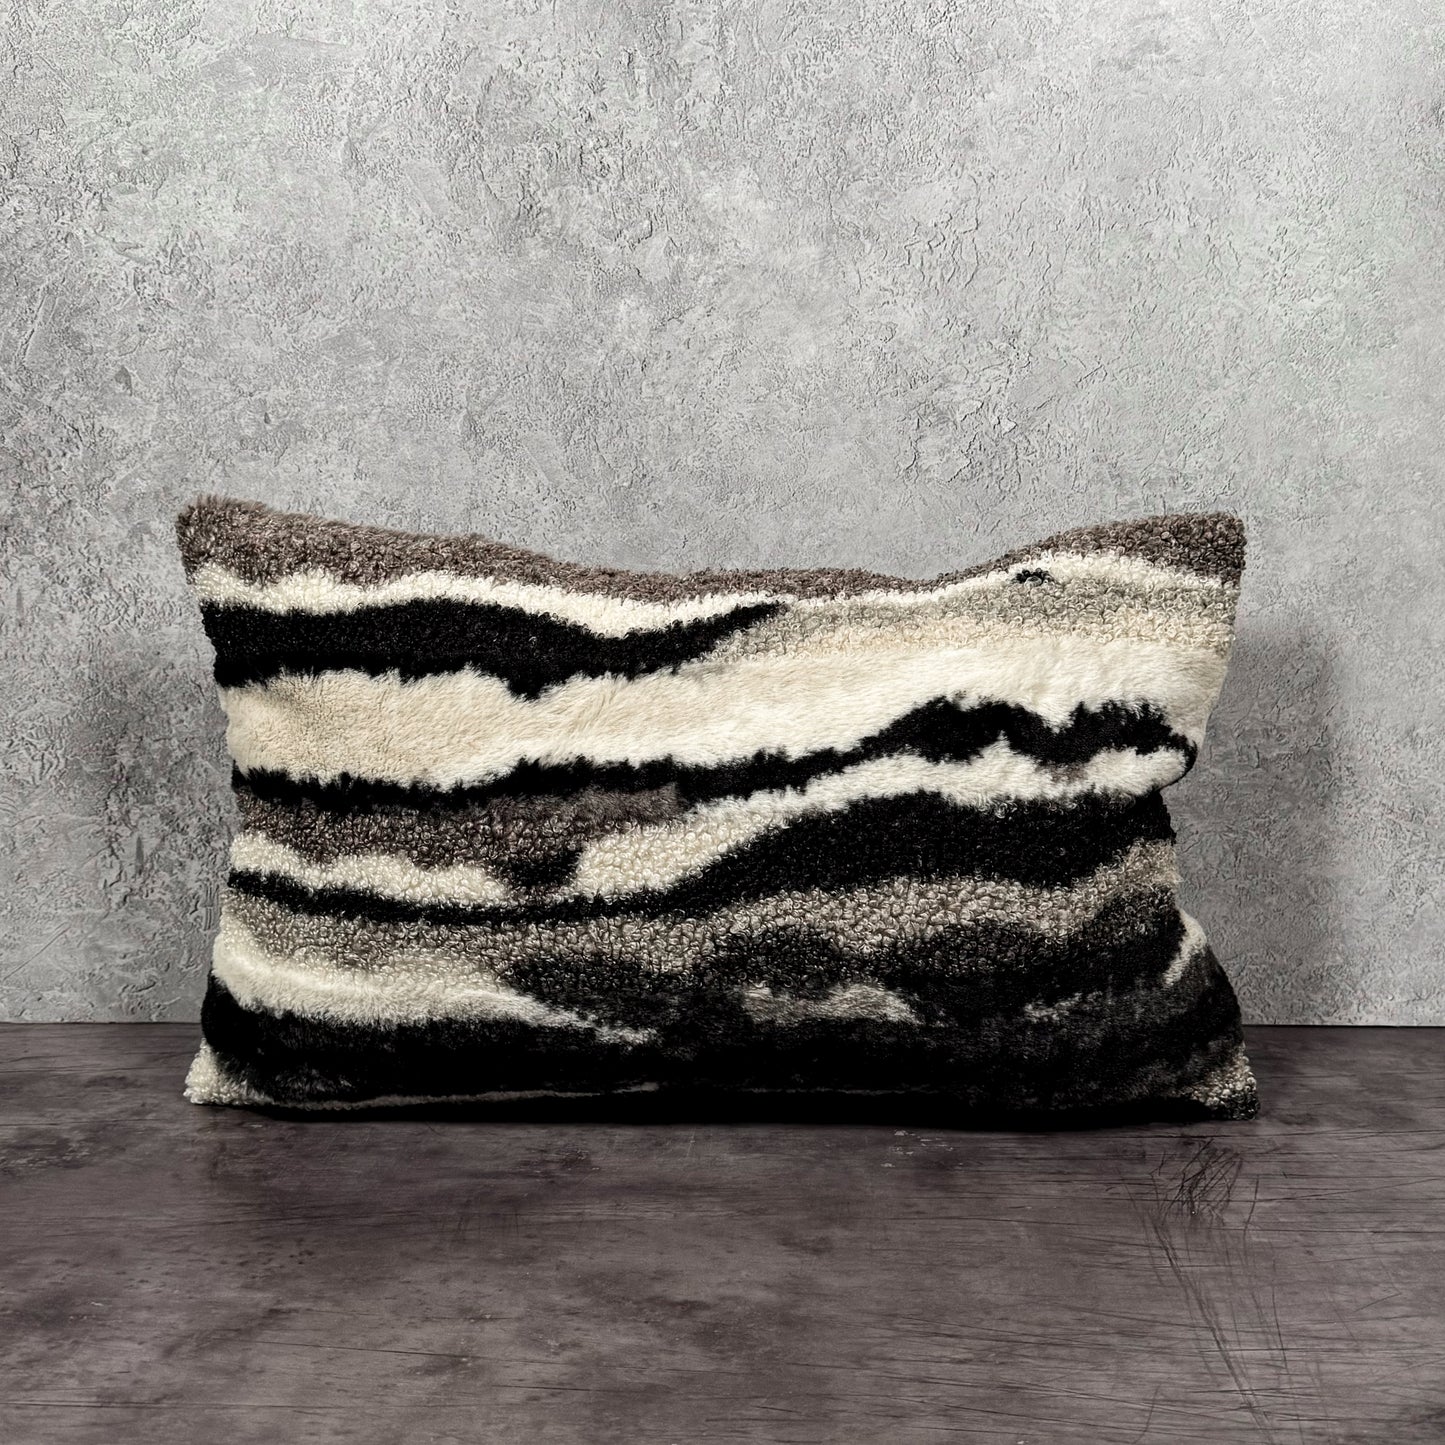 Striped Pillow Cover - Black